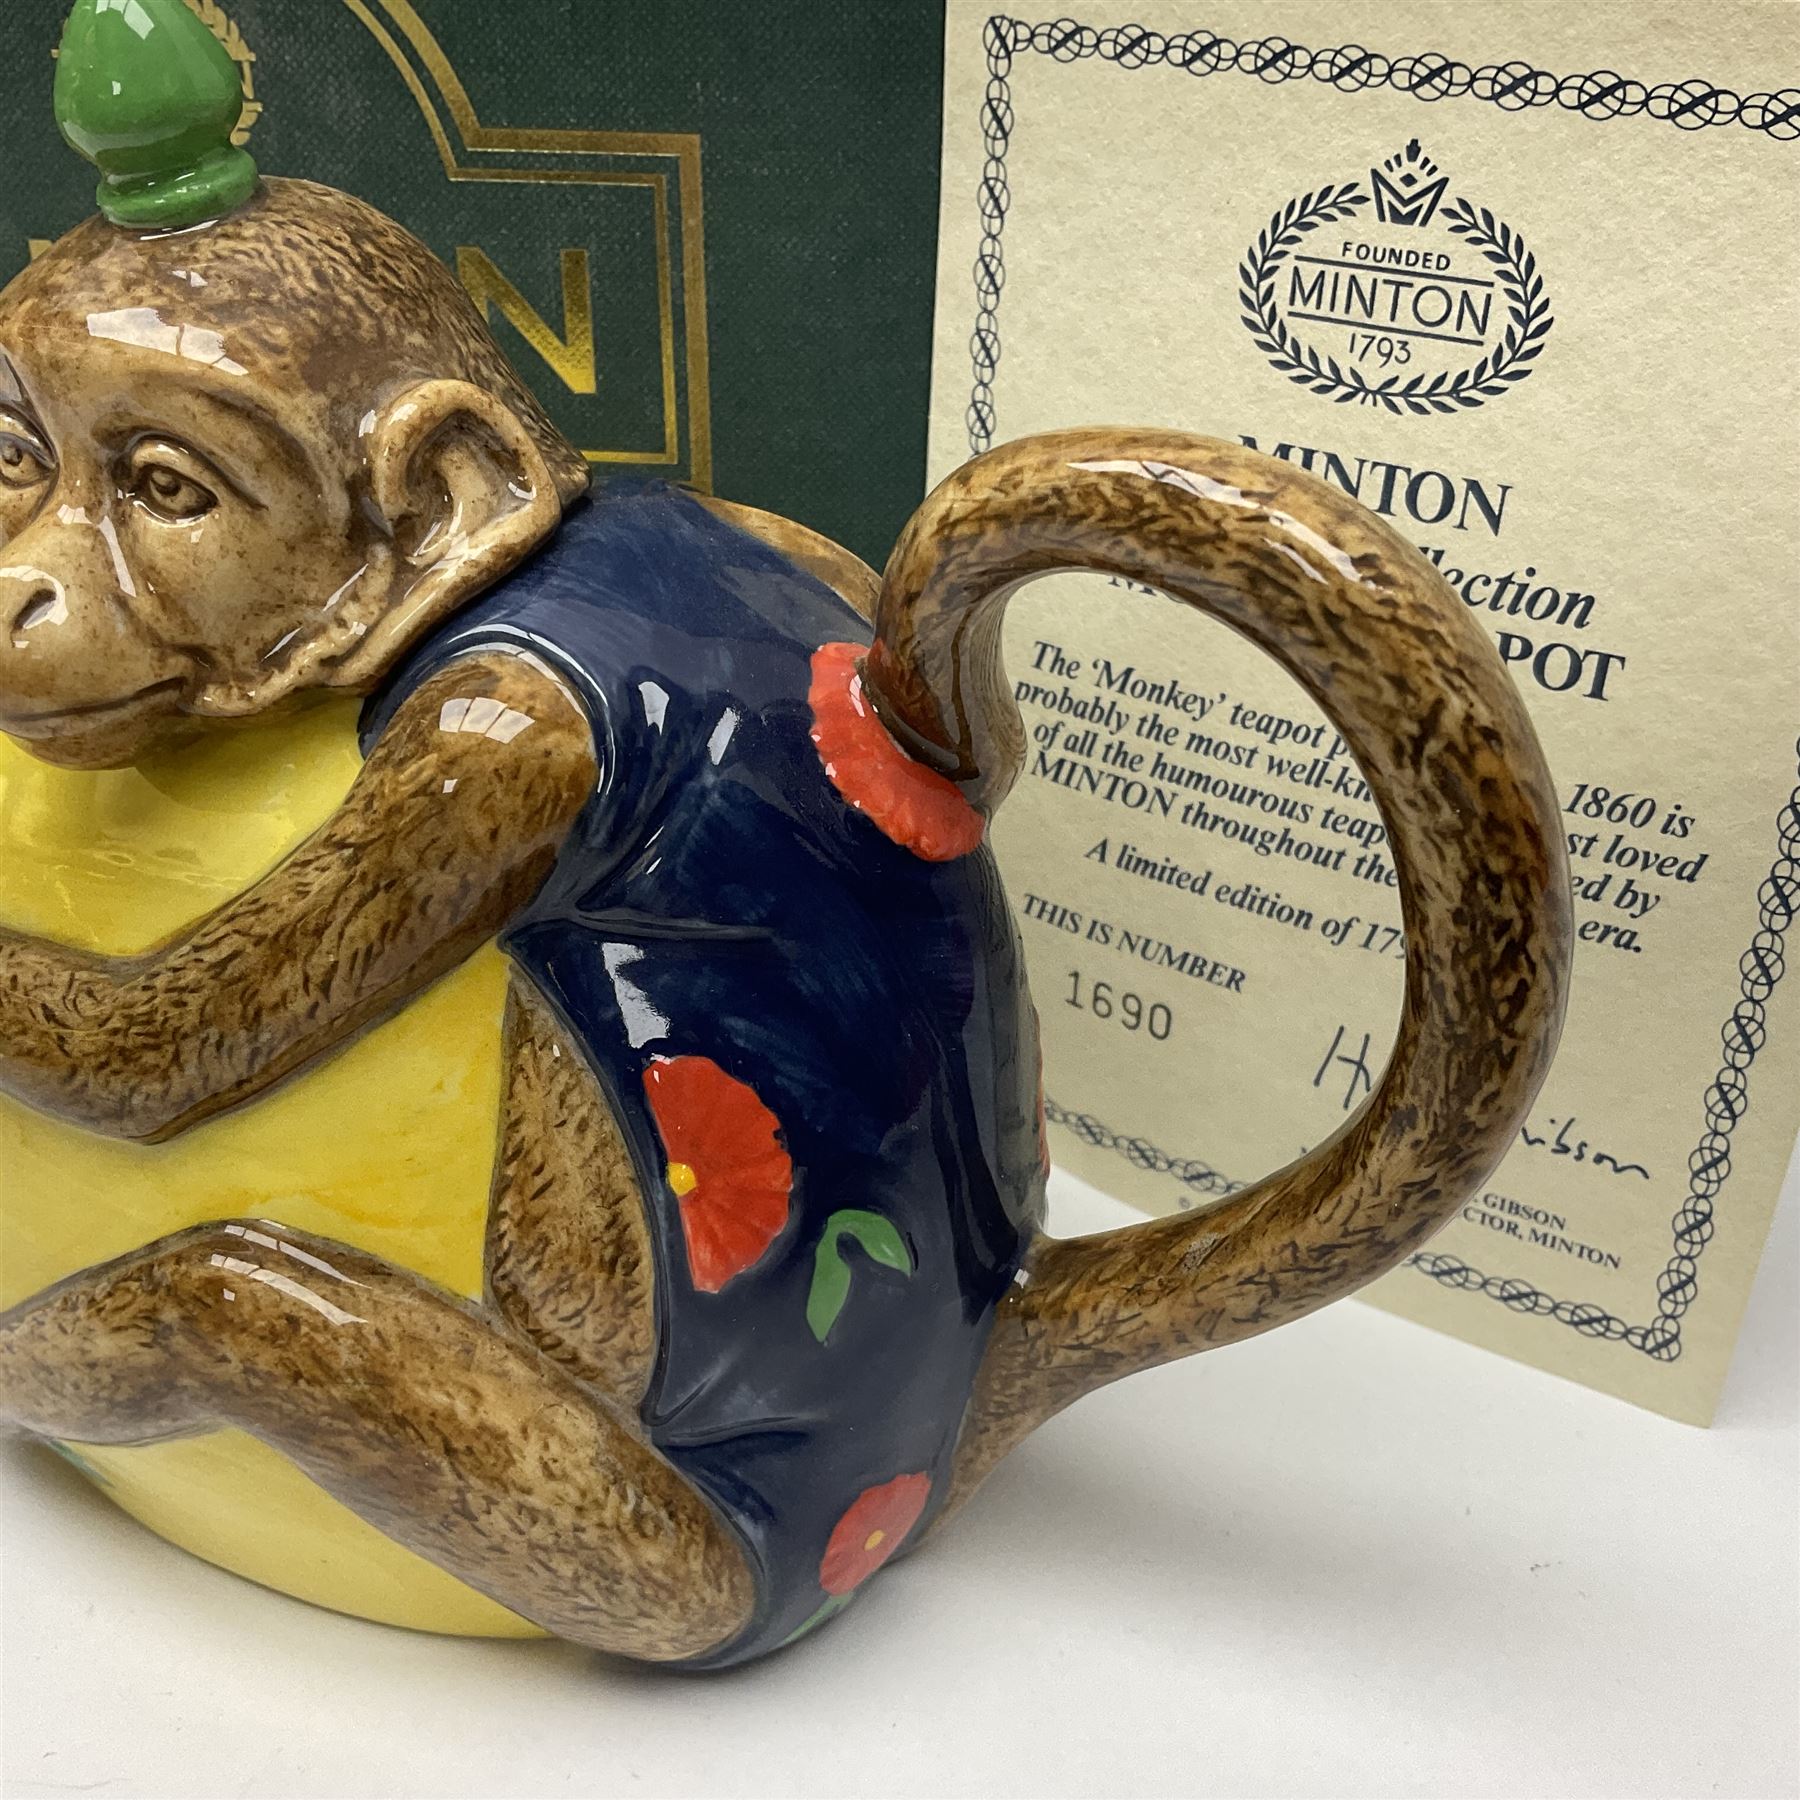 Minton Archive collection monkey teapot - Image 4 of 9